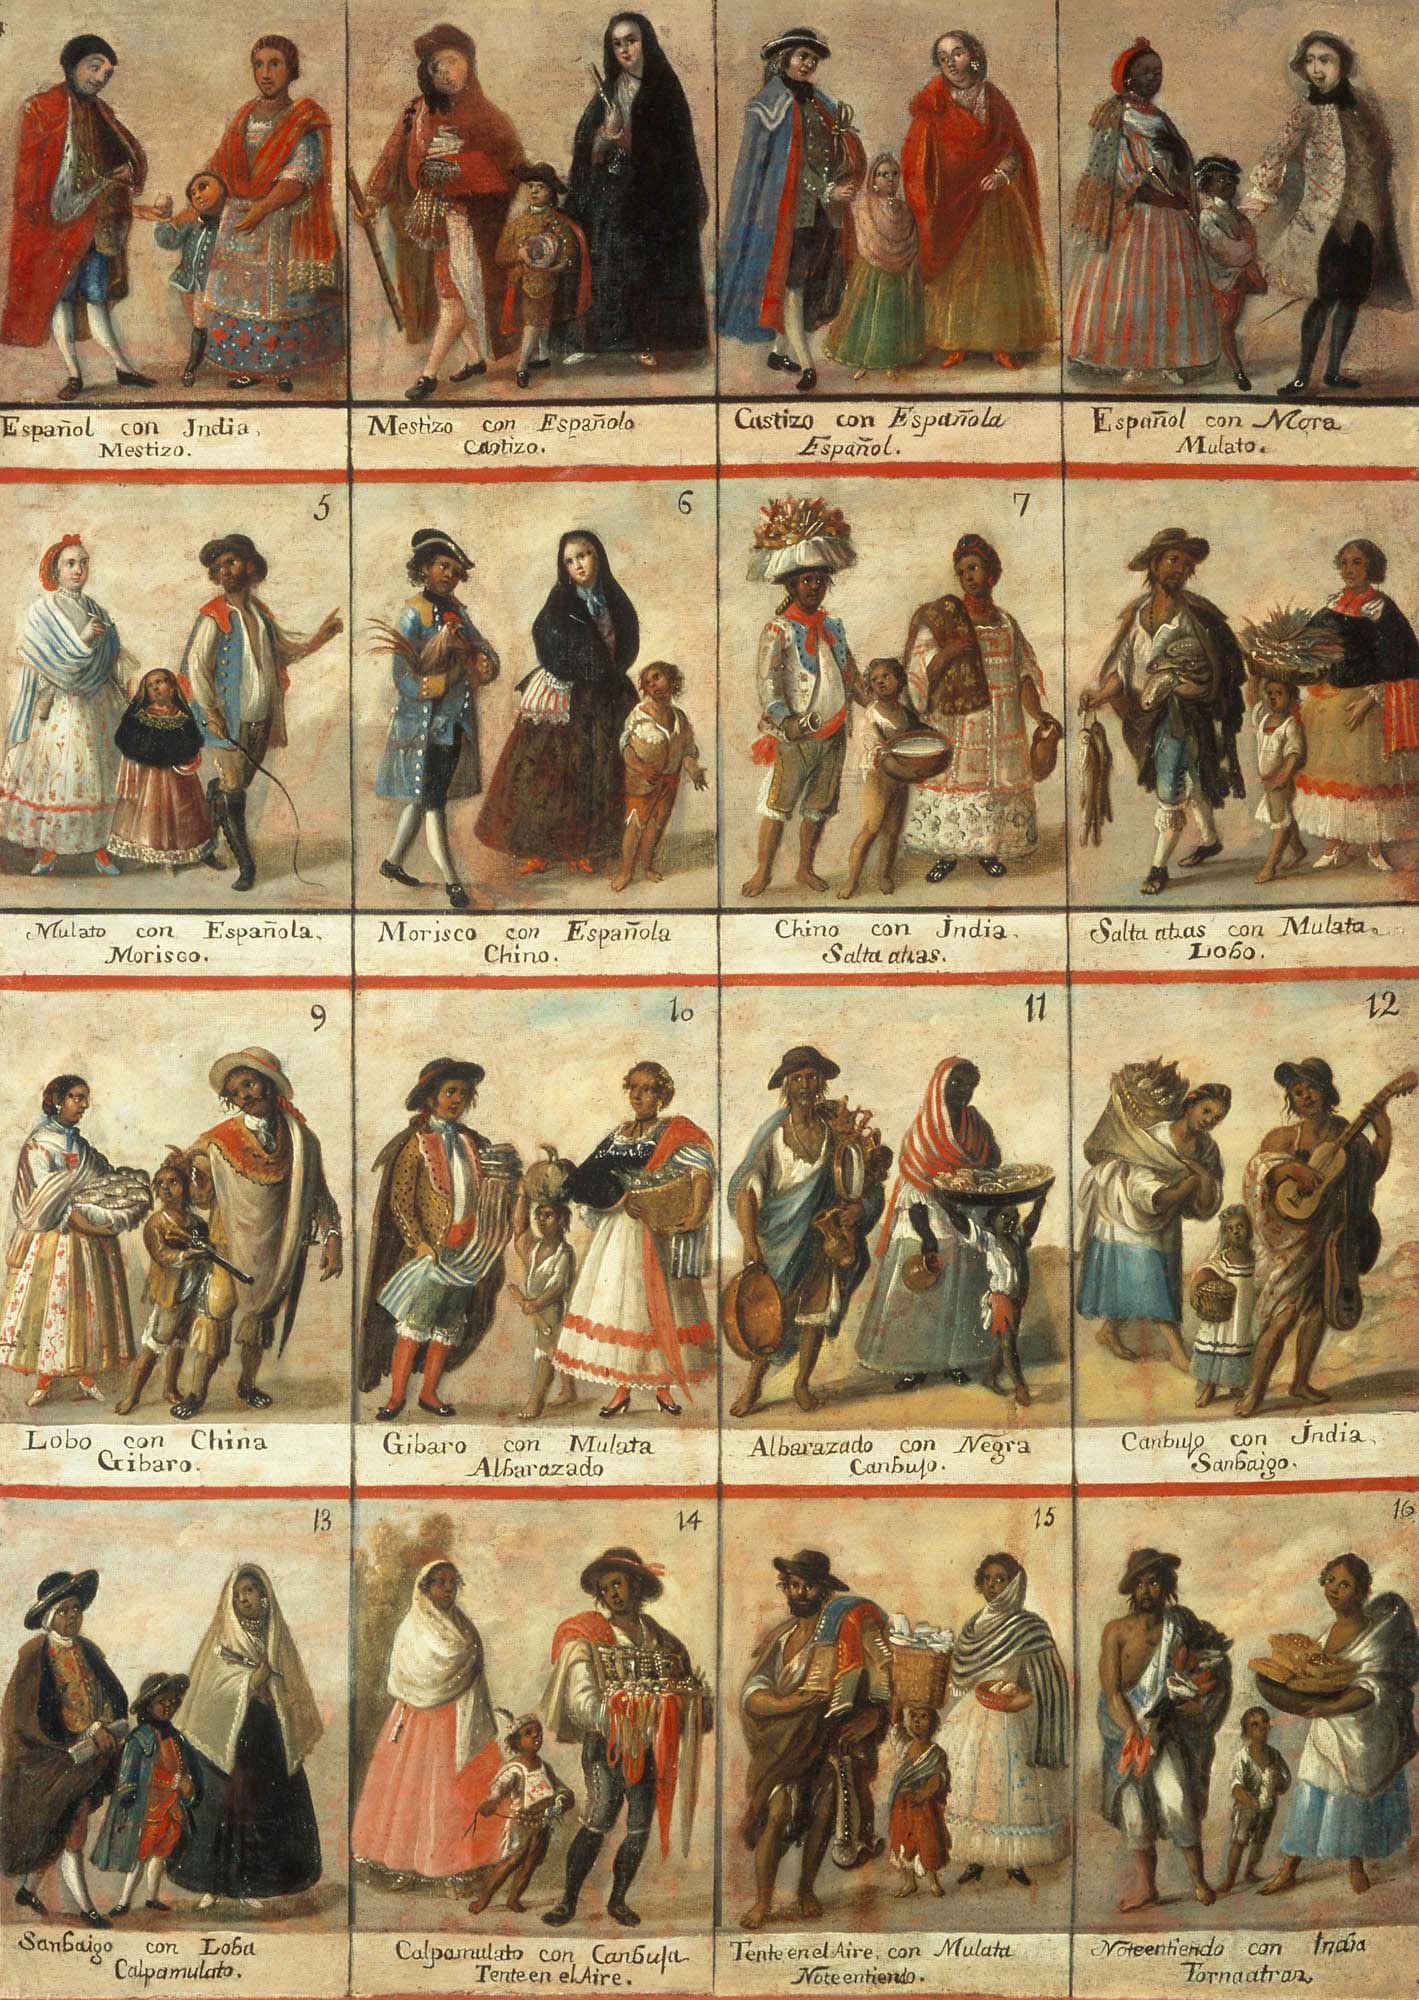 Casta painting containing complete set of 16 casta combinations or racial classifications in Spanish colonies in the Americas